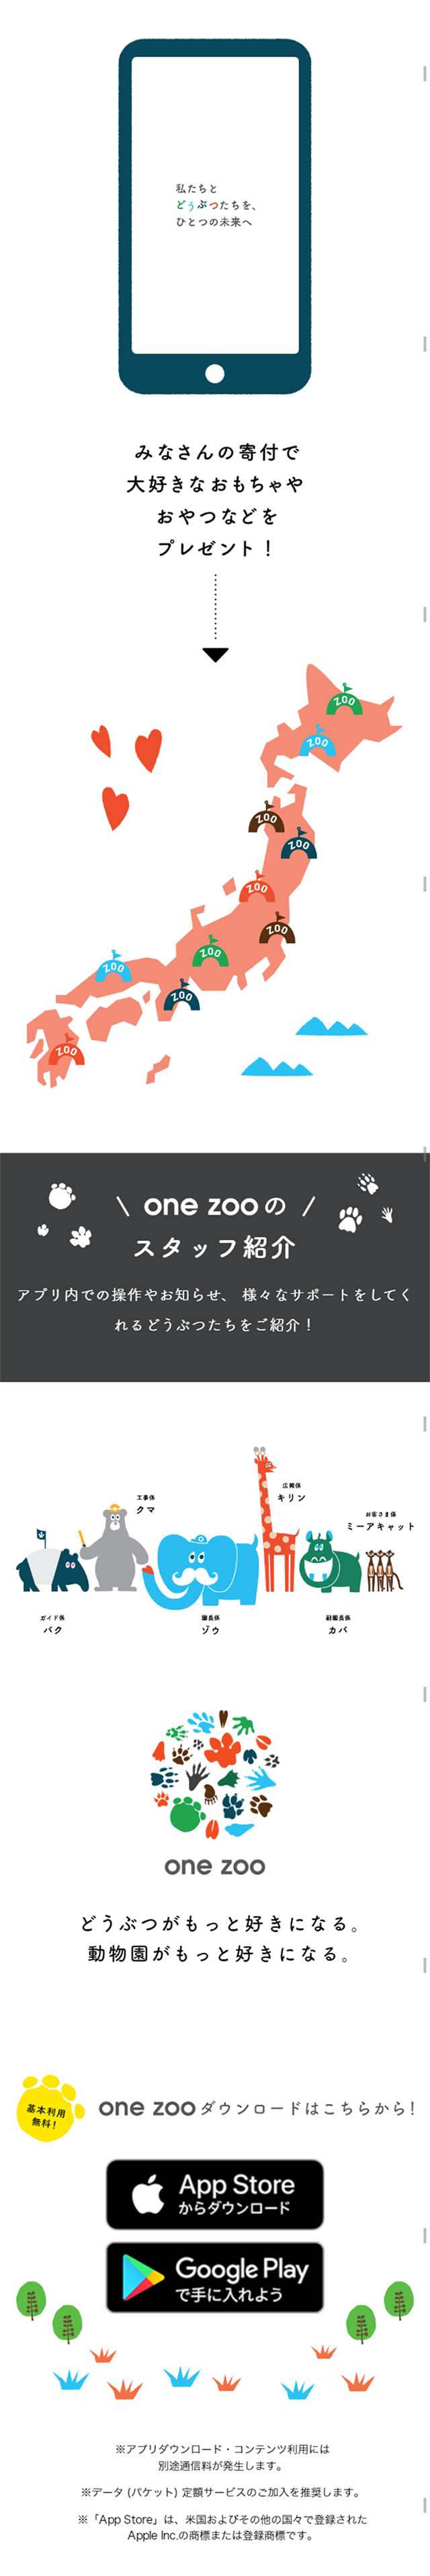 one zoo_sp_2